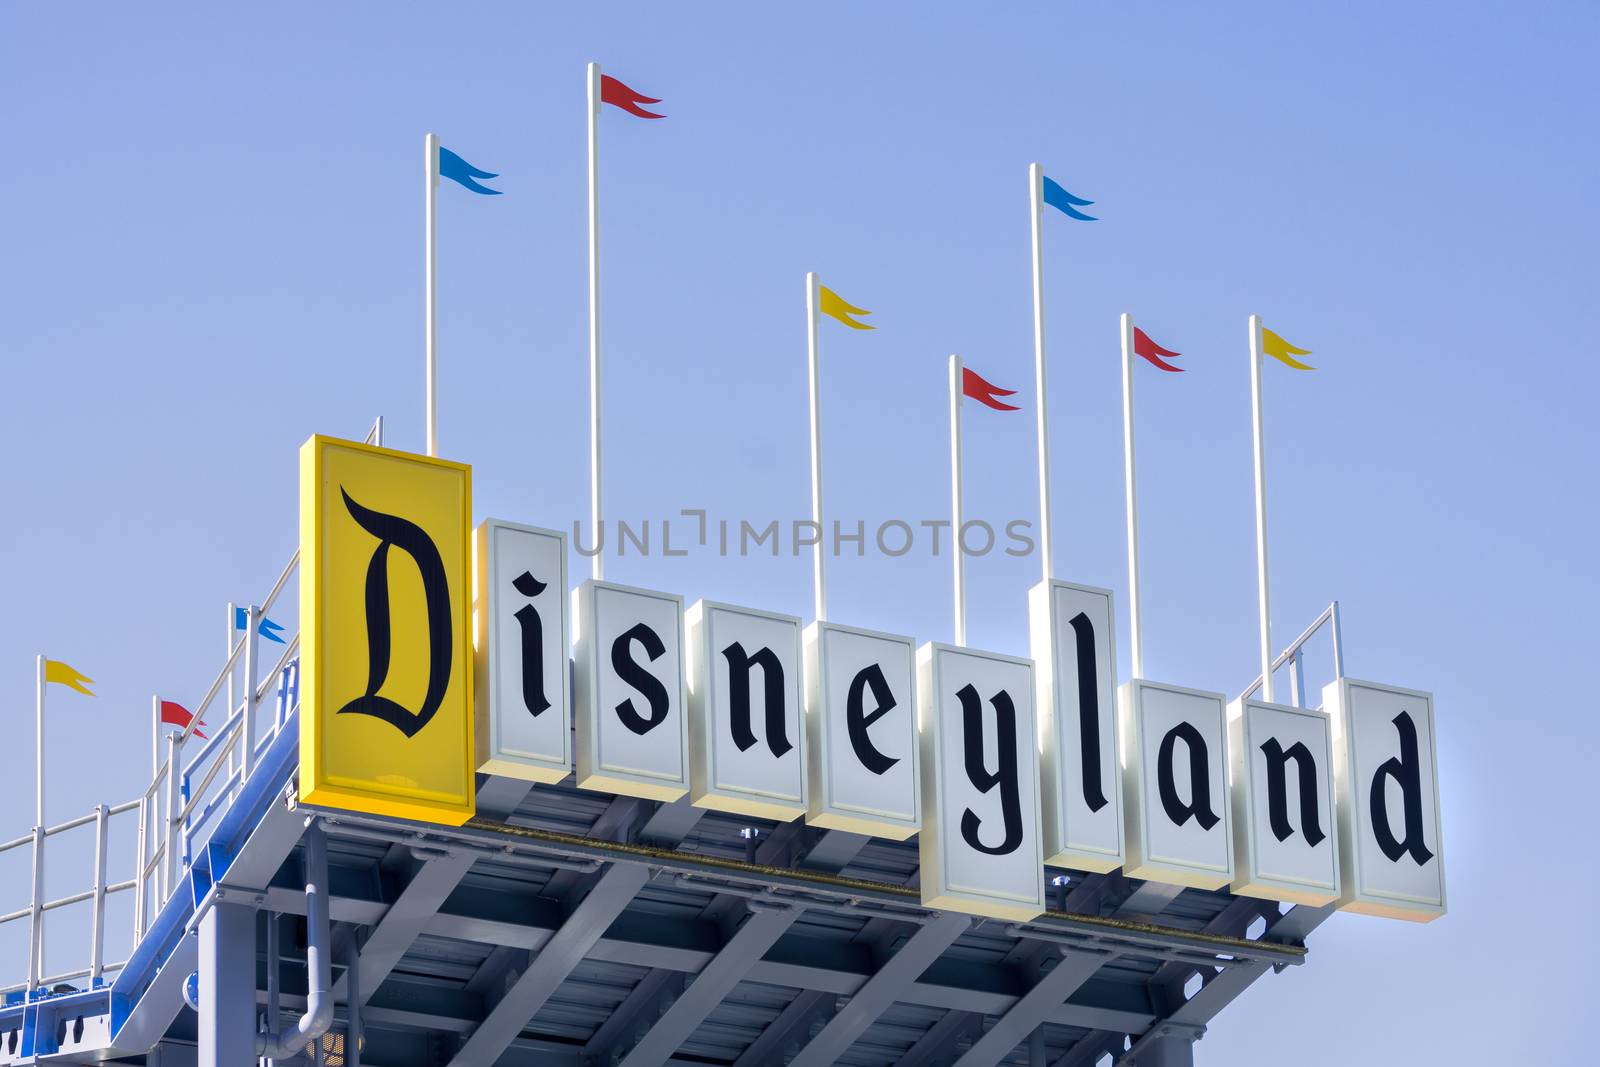 Disneyland Entrance Sign by wolterk